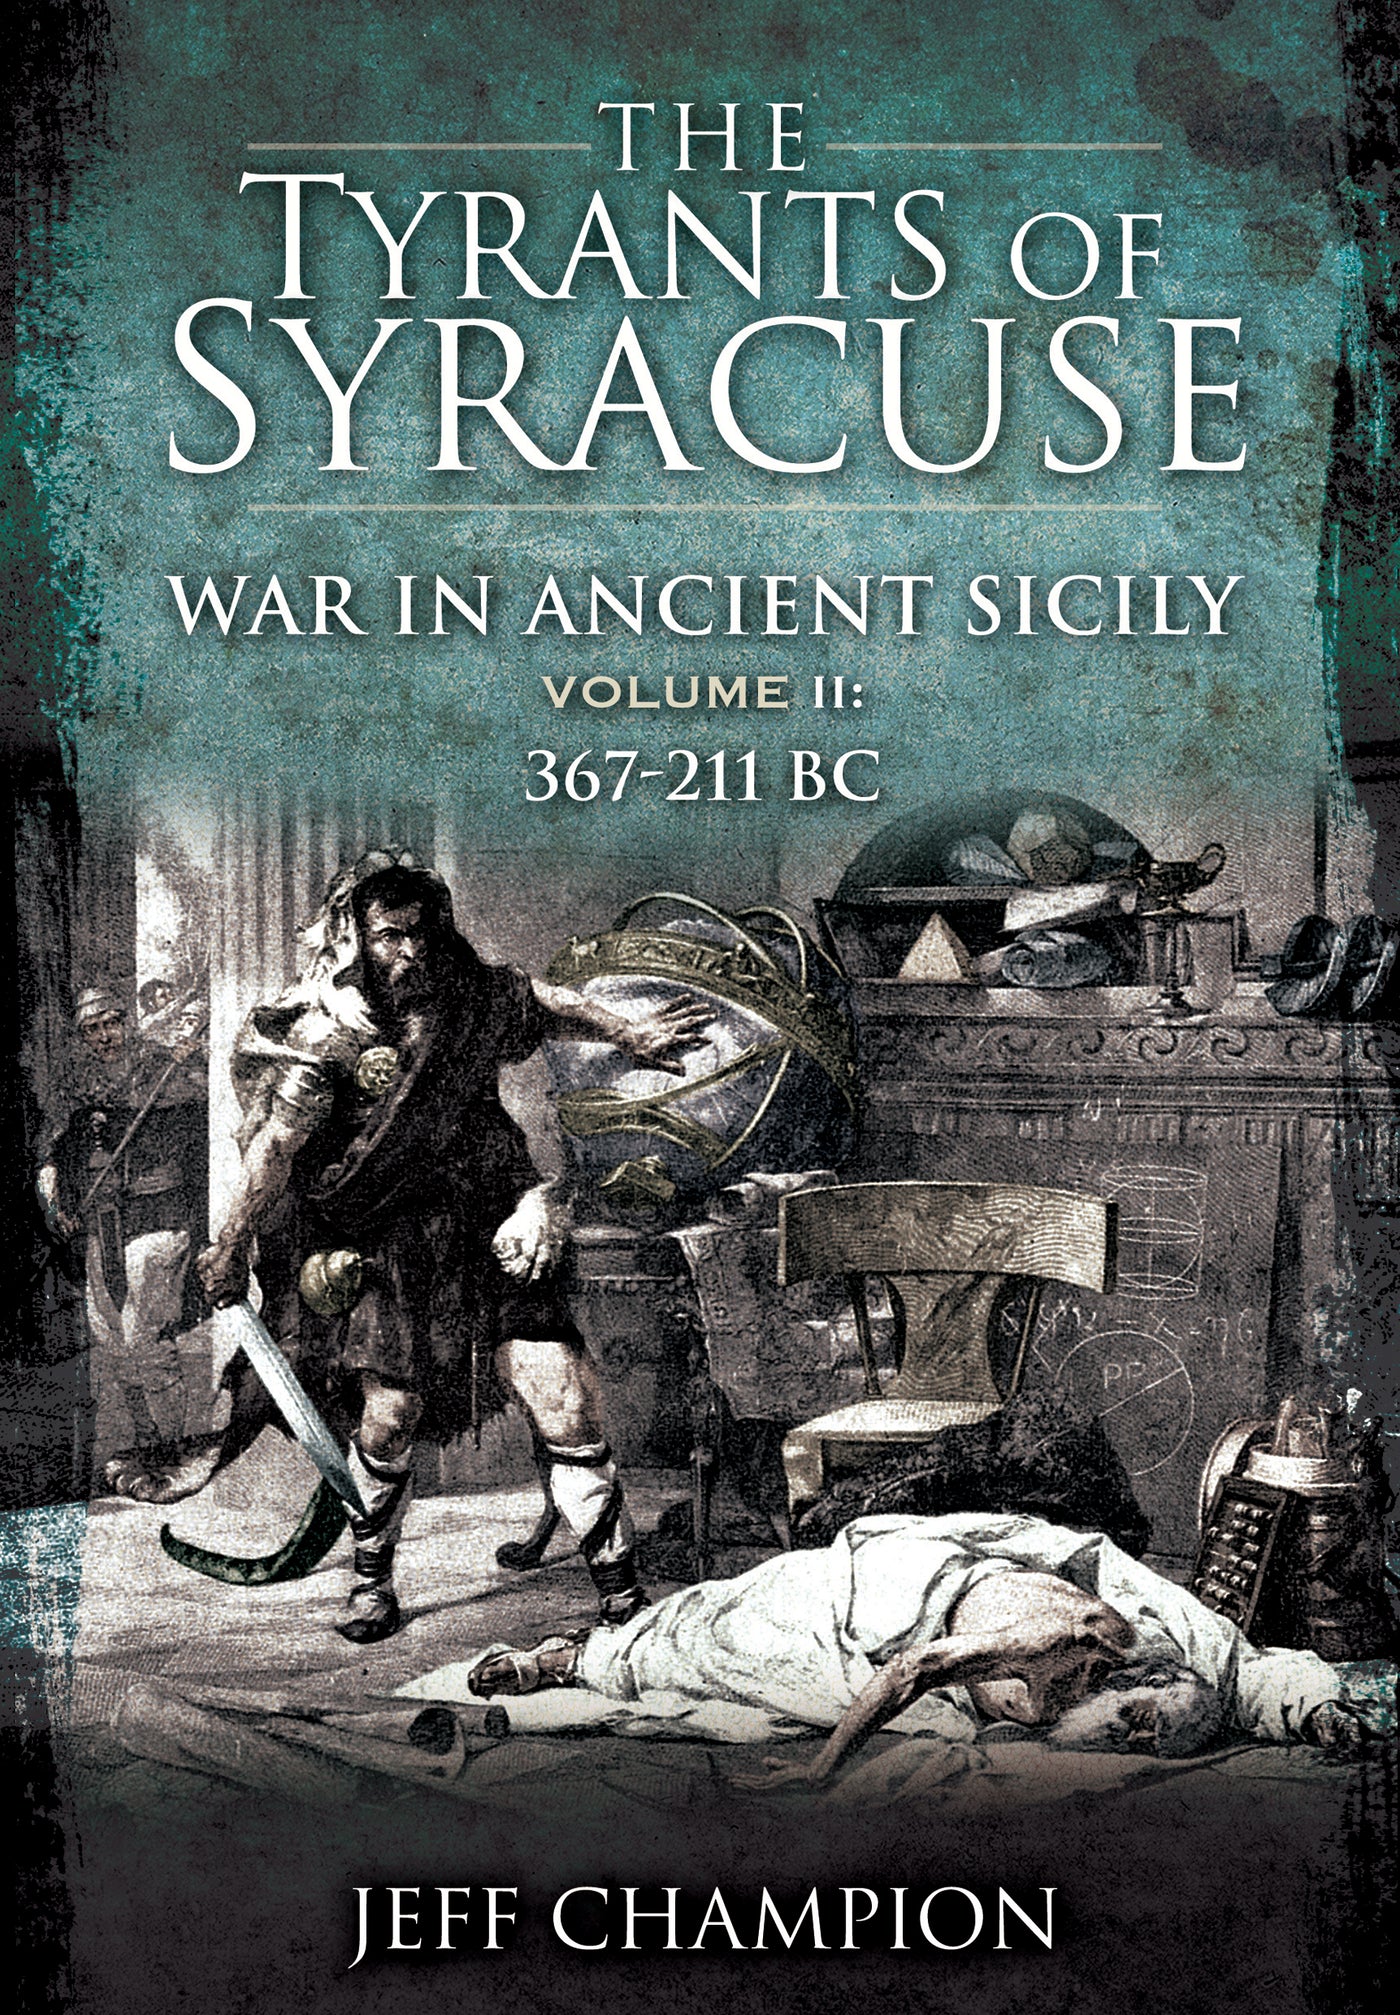 The Tyrants of Syracuse - War in Ancient Sicily